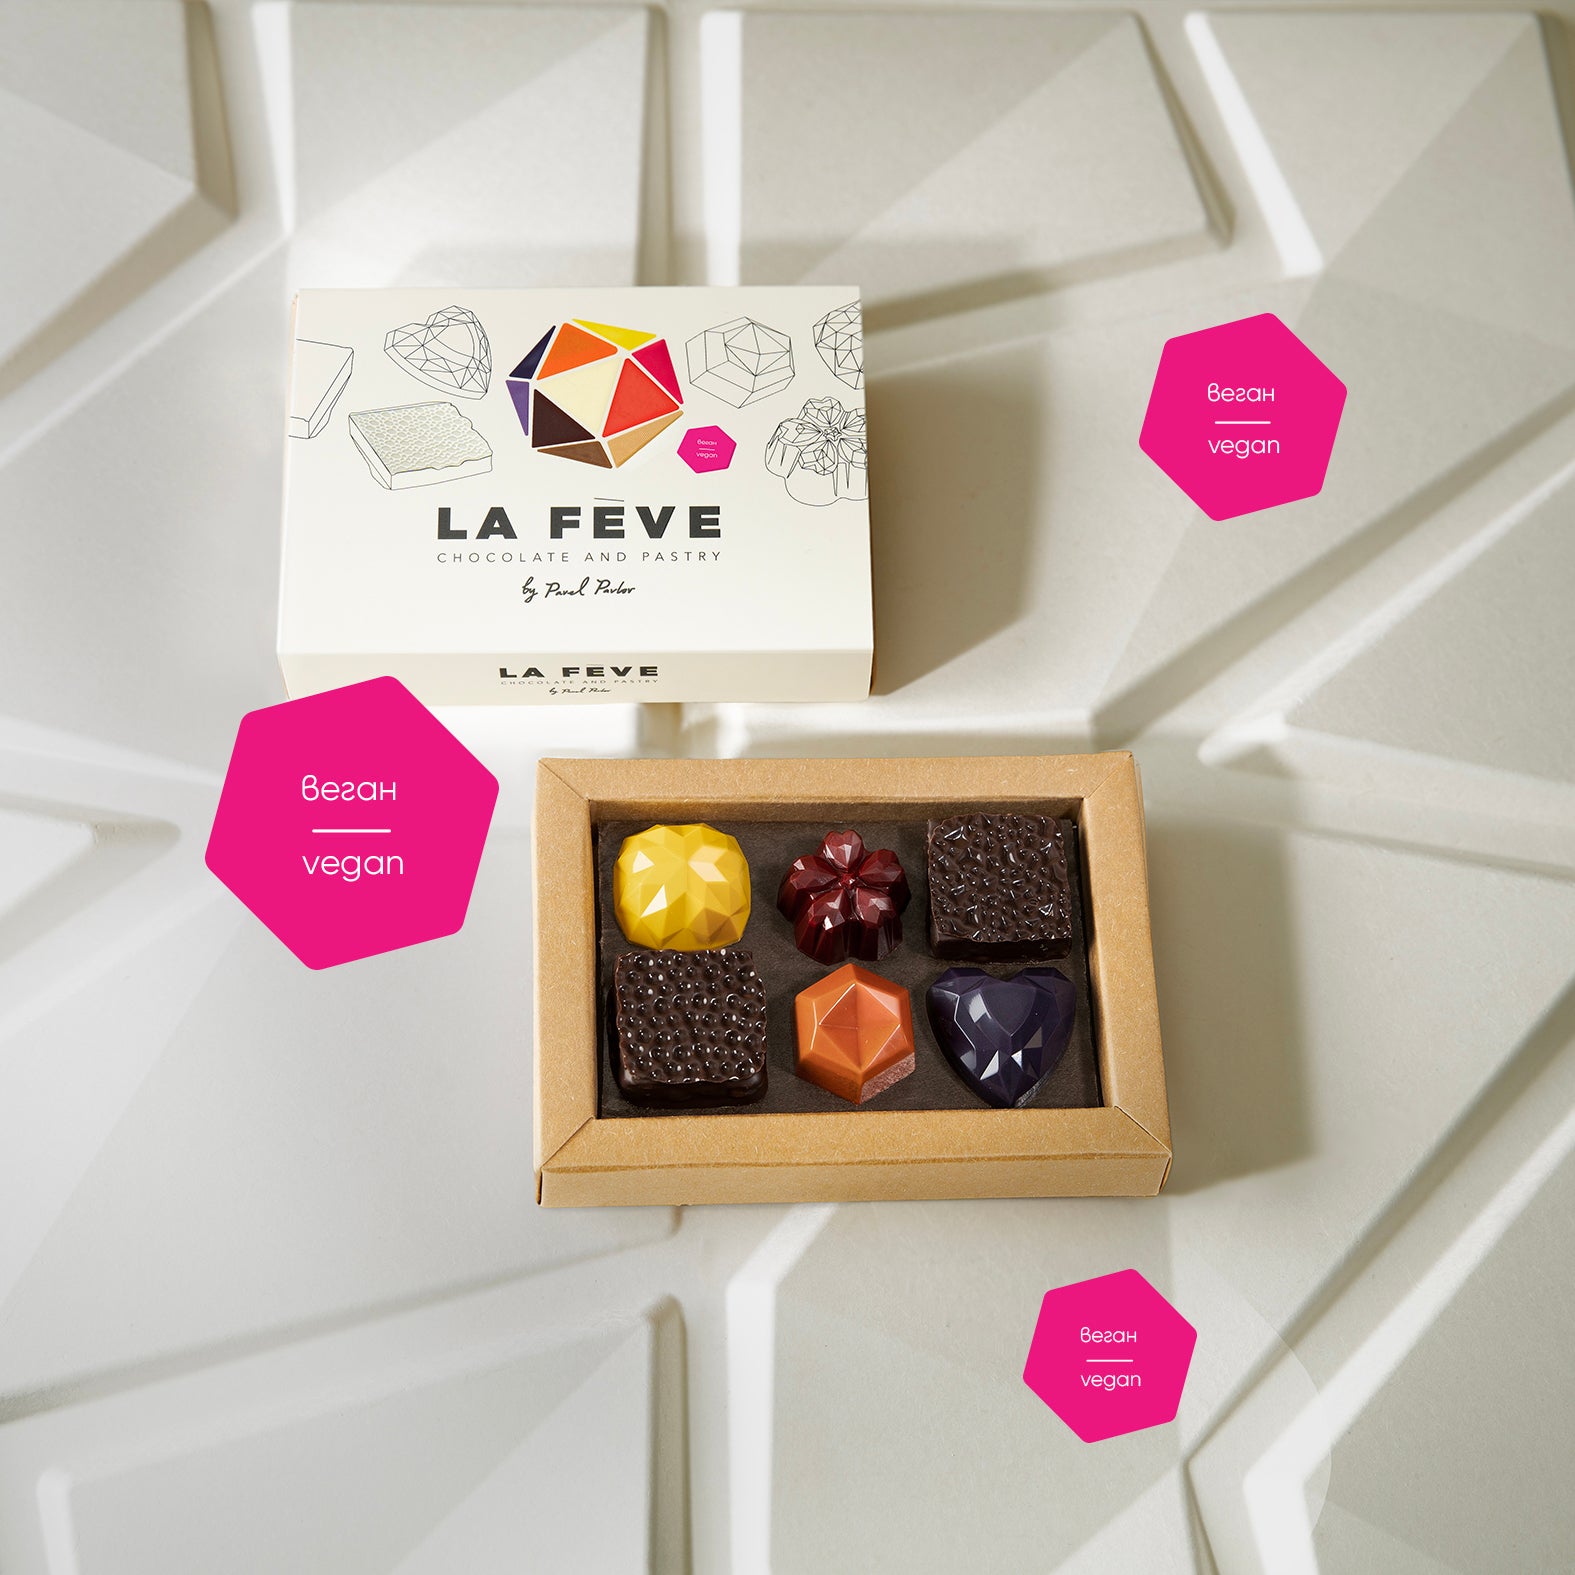 In Delectable Focus: Pavel Pavlov and His Chocolate “Jewels